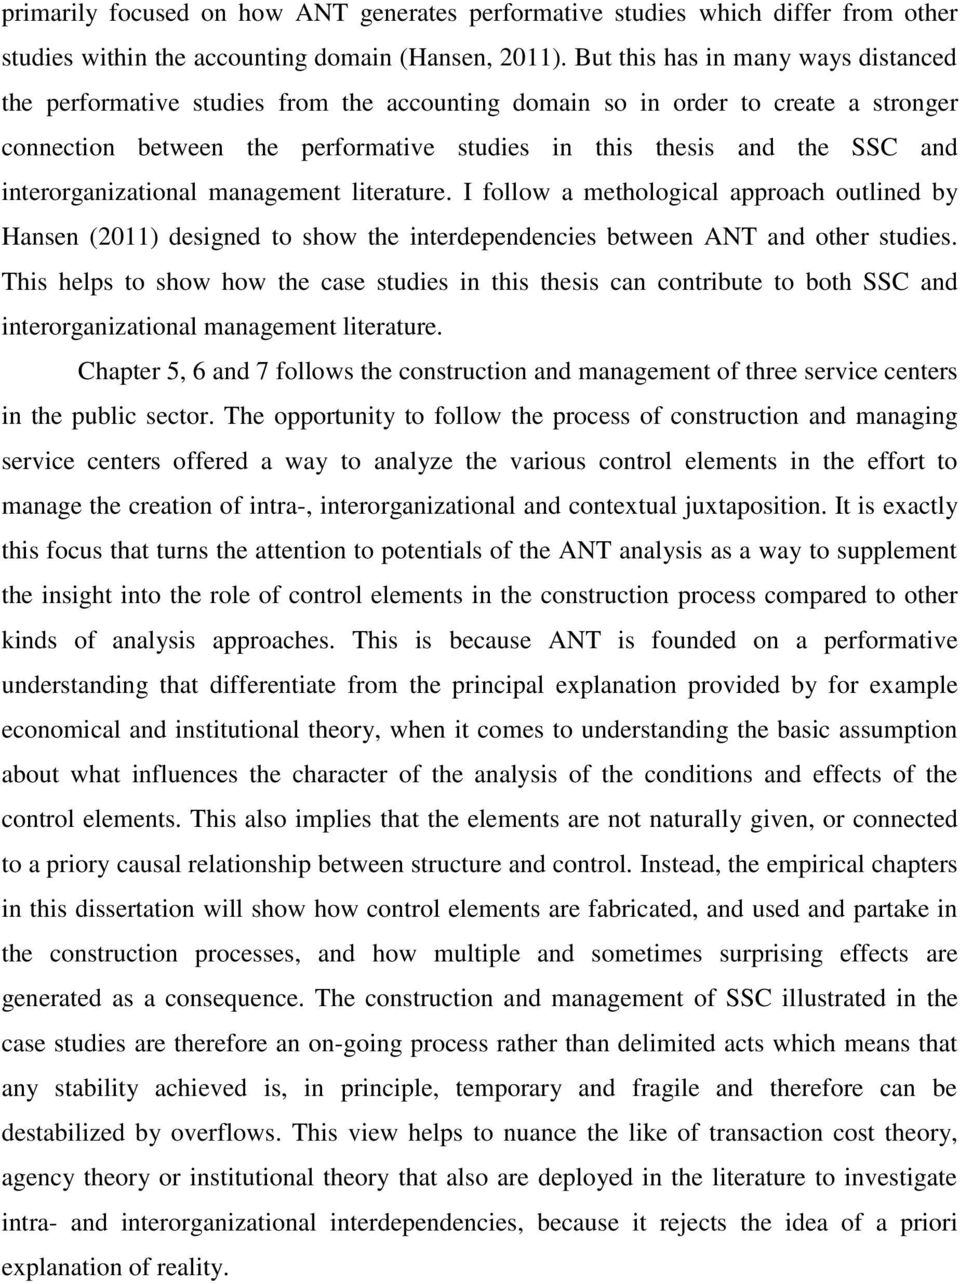 interorganizational management literature. I follow a methological approach outlined by Hansen (2011) designed to show the interdependencies between ANT and other studies.